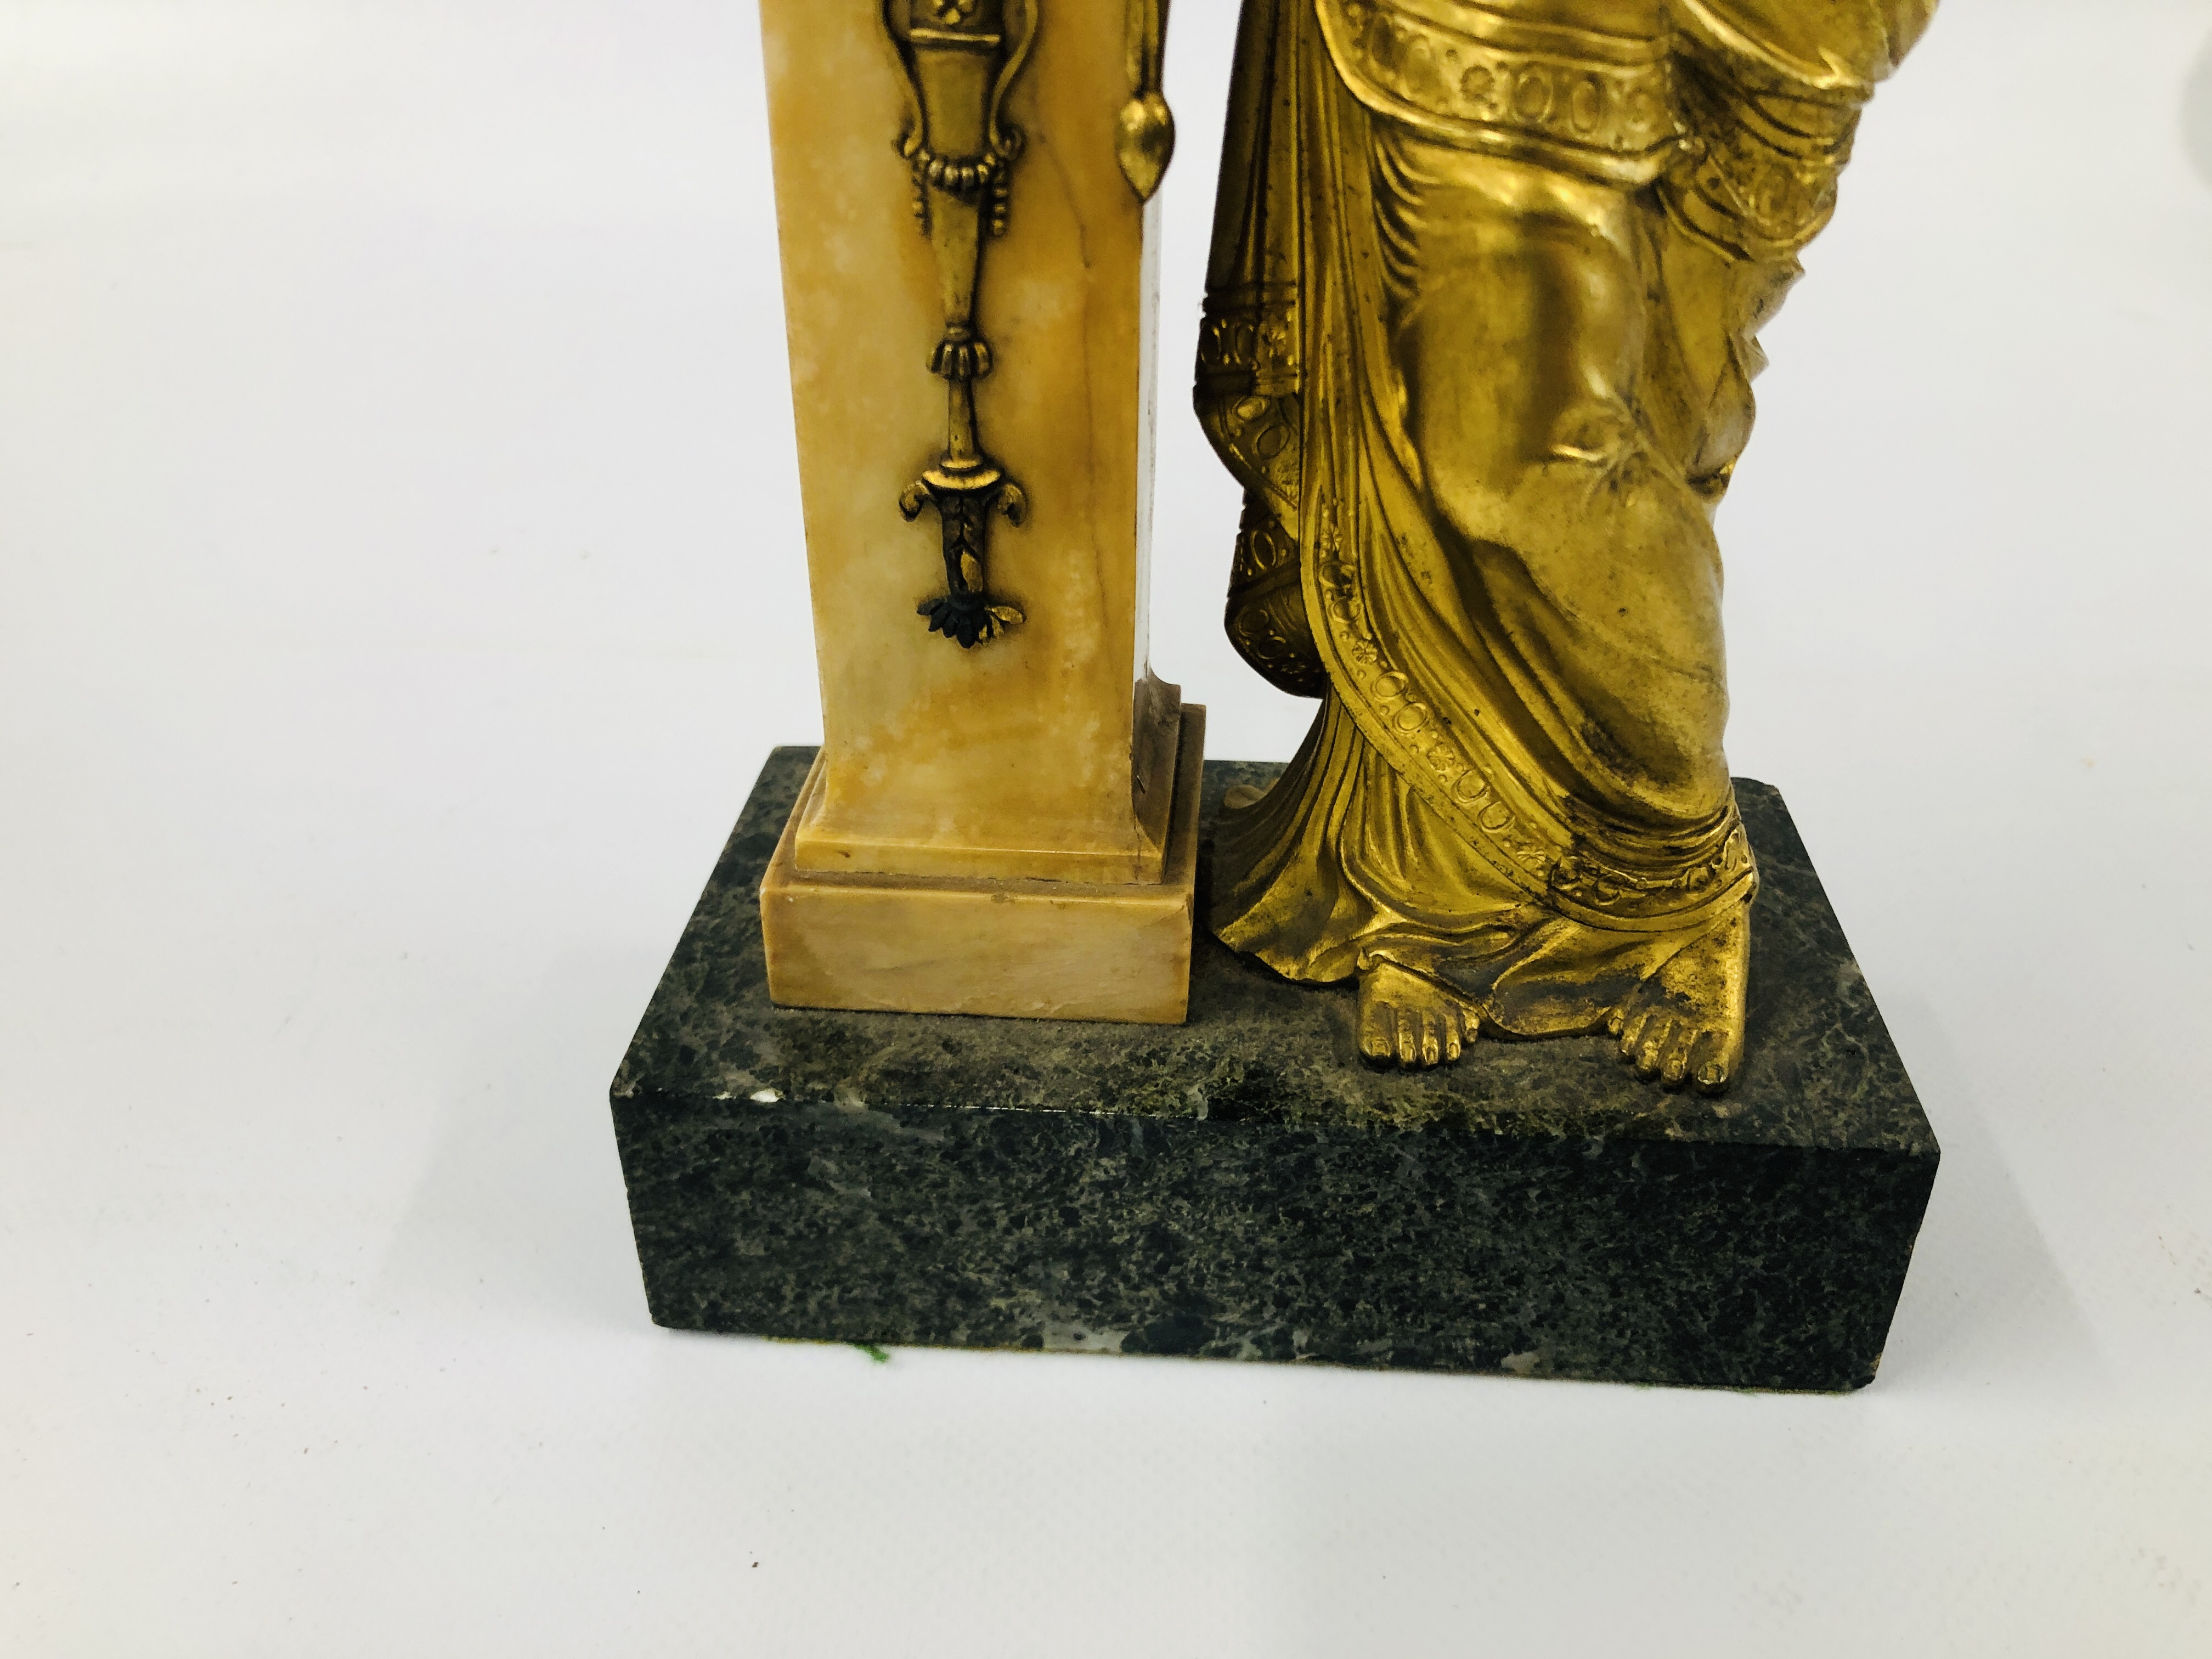 A BELLE EPOQUE GILT BRONZE FIGURE OF A STANDING WOMAN IN CLASSICAL DRESS, READING FROM A BOOK, - Image 4 of 6